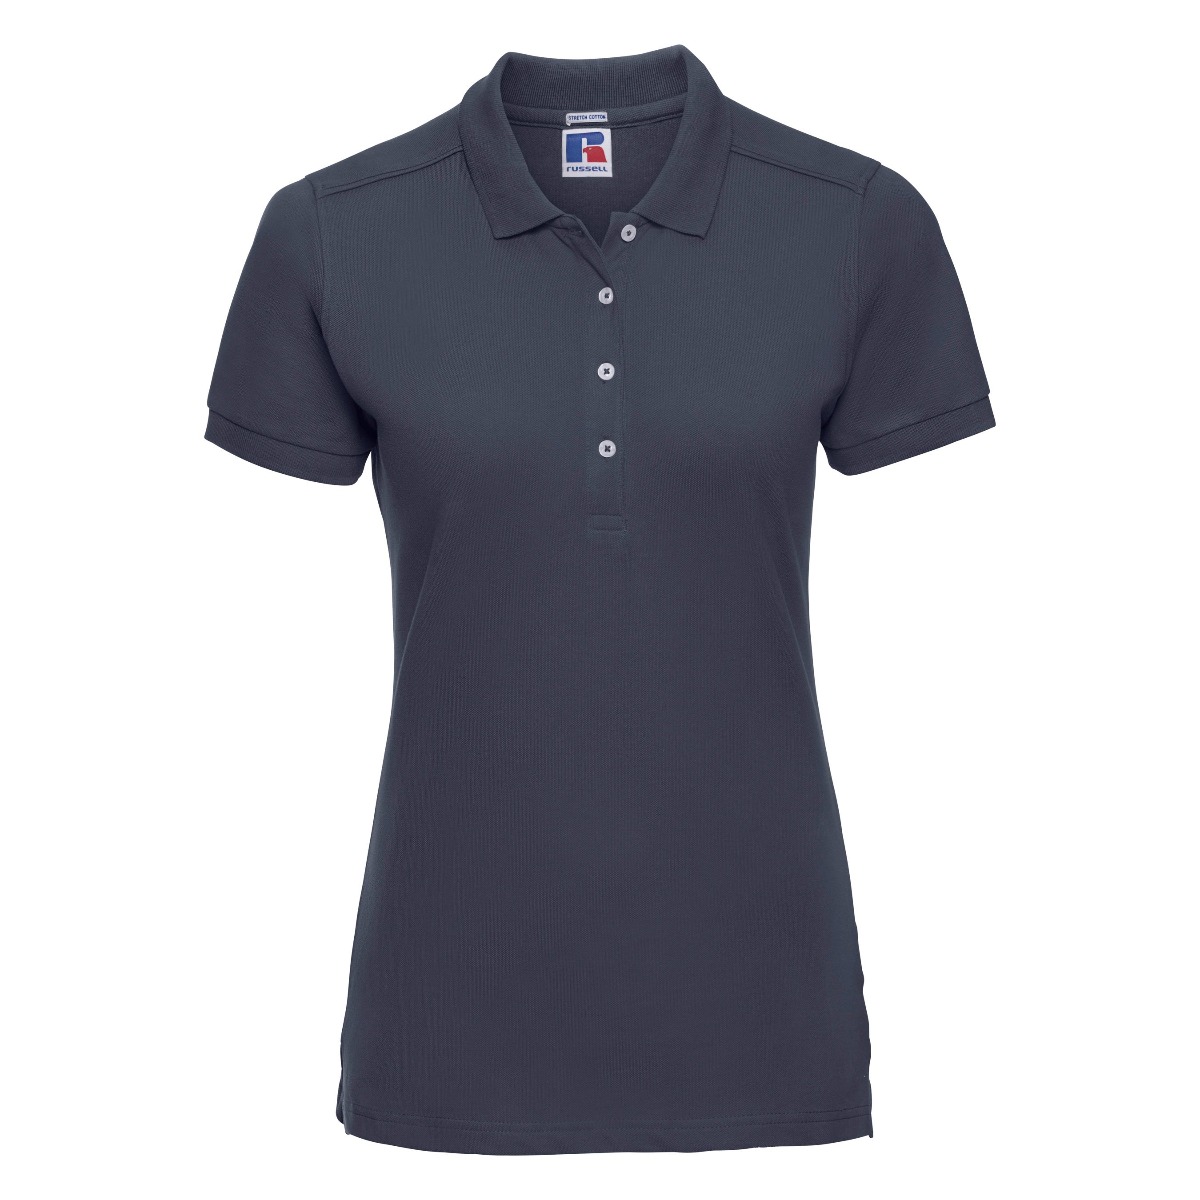 ax-httpswebsystems.s3.amazonaws.comtmp_for_downloadrussell-womens-stretch-french-navy_1.jpg